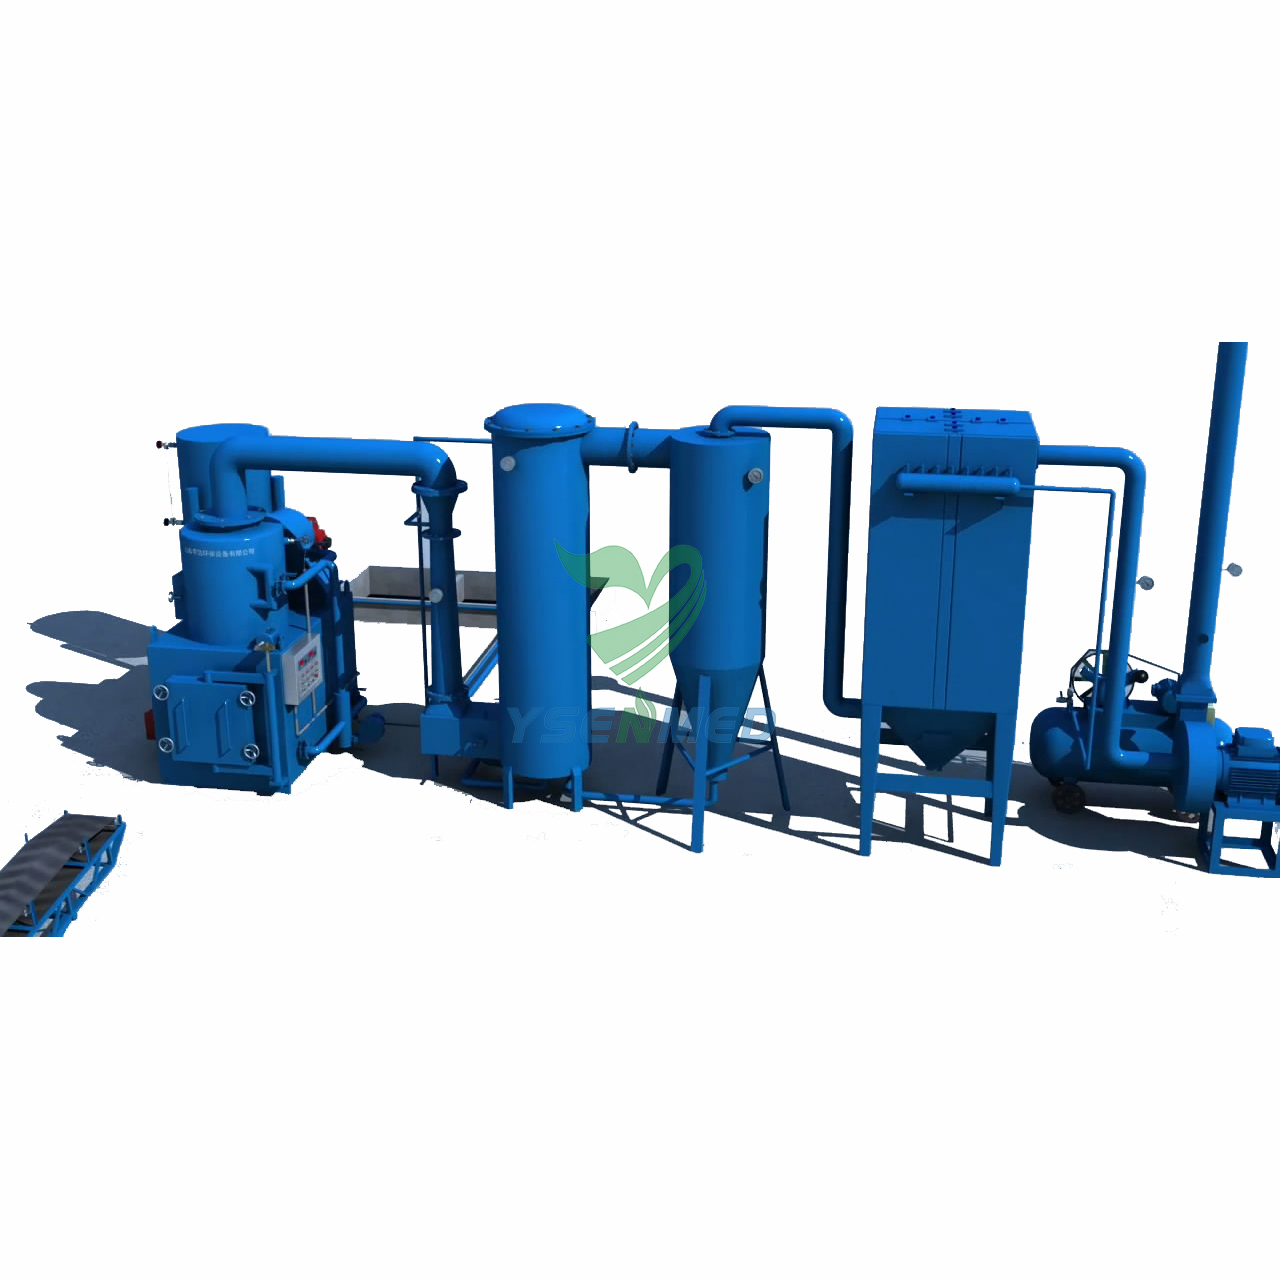 Gas Purification System for incinerator YSFS-WQ